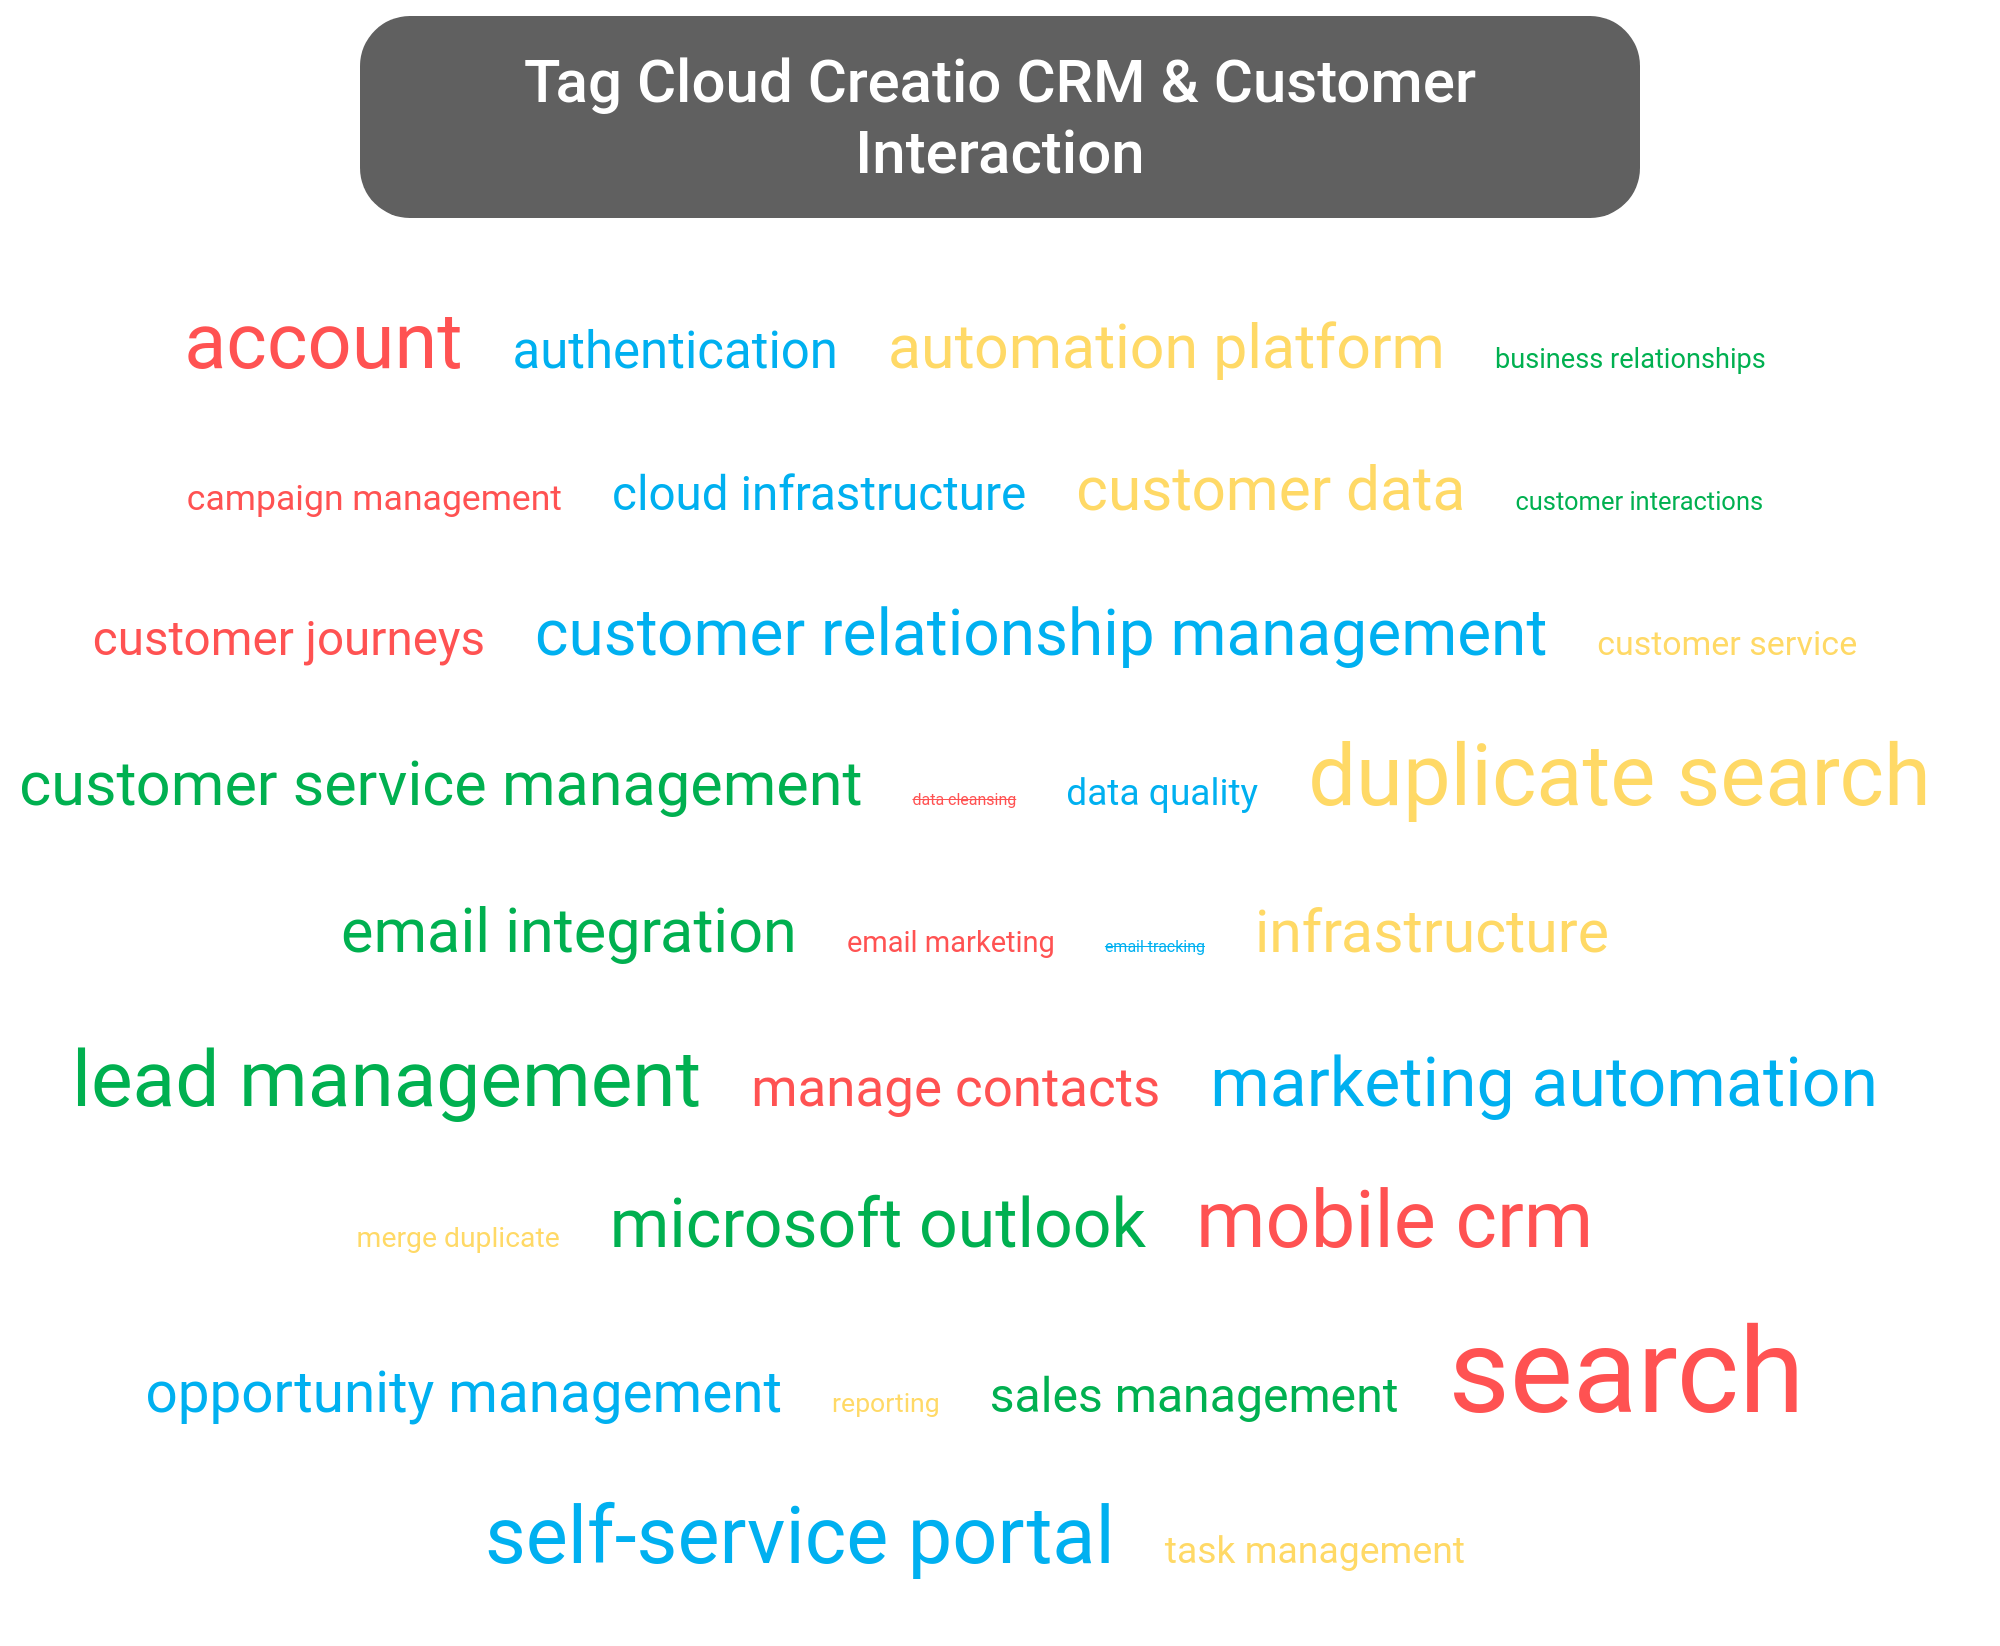 Tag cloud of the Creatio CRM tools.